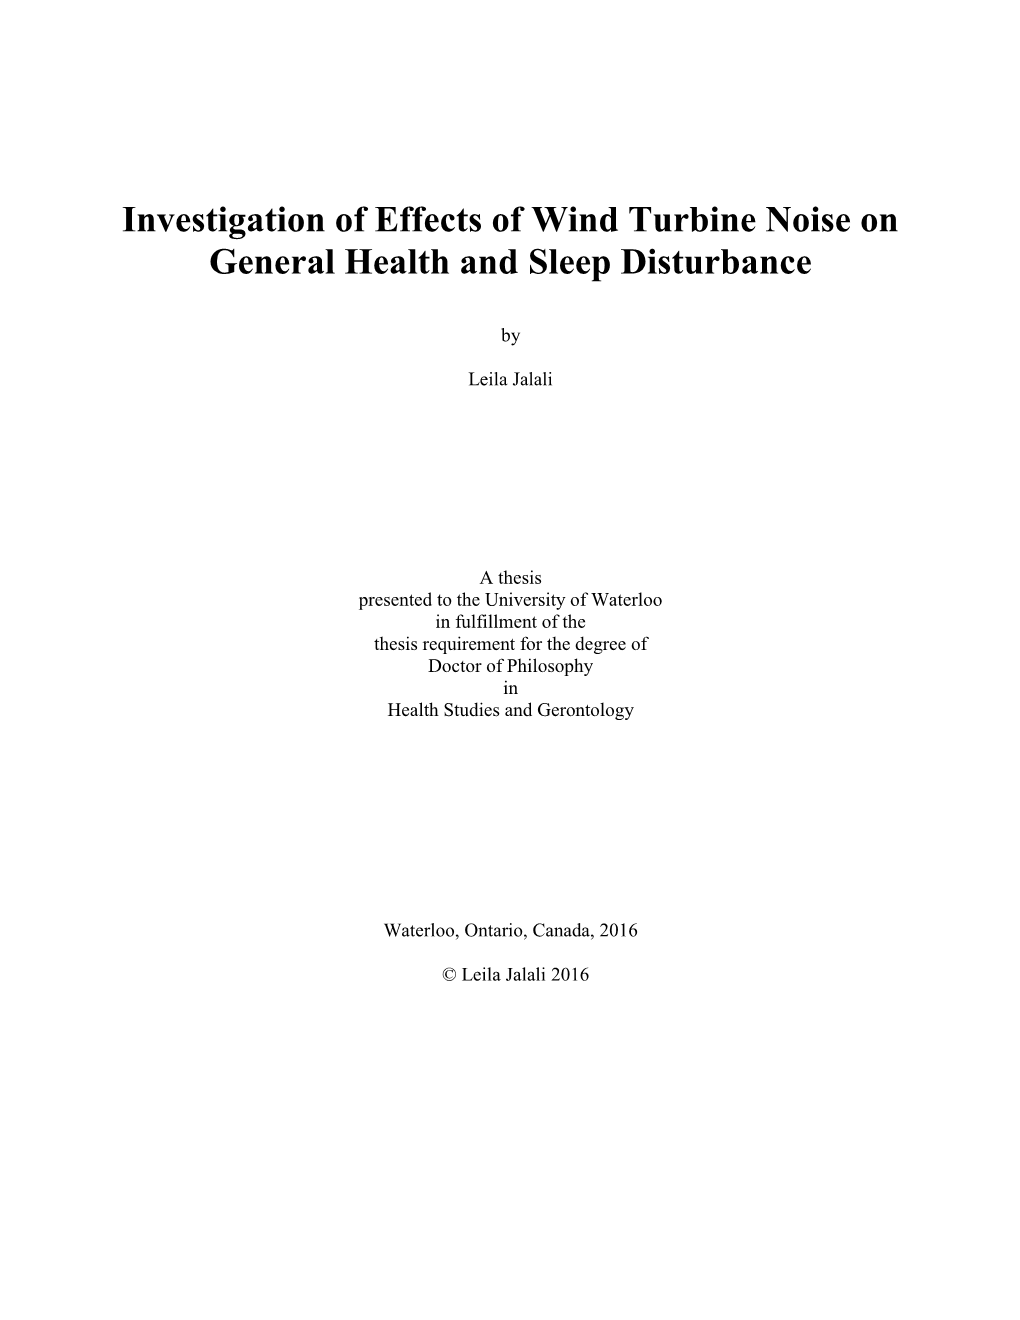 Investigation of Effects of Wind Turbine Noise on General Health and Sleep Disturbance